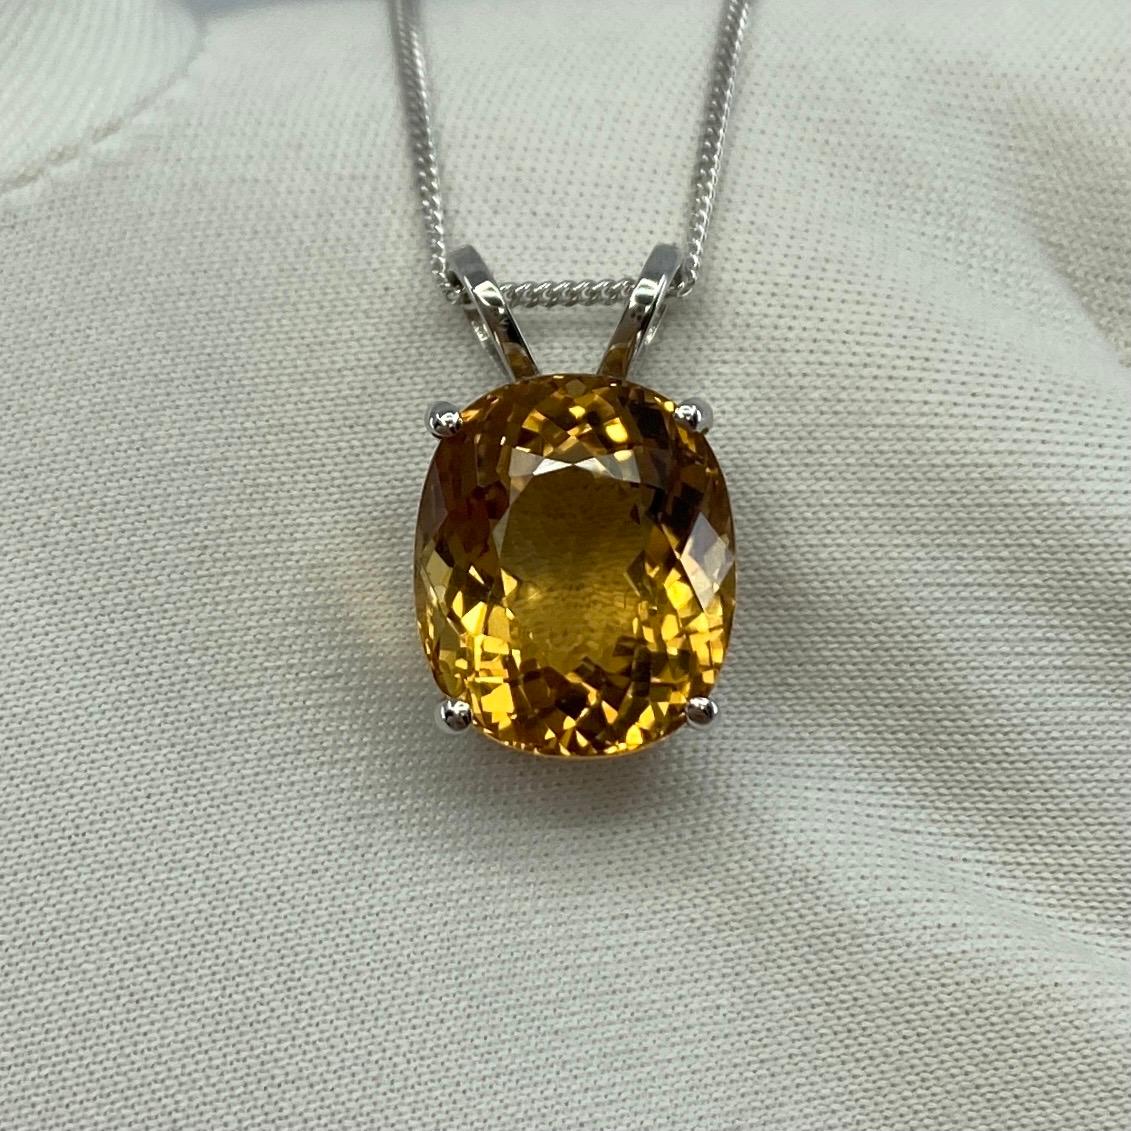 Oval Cut 6.05ct Vivid Yellow Heliodor Golden Beryl Oval 18k White Gold Pendant Necklace For Sale